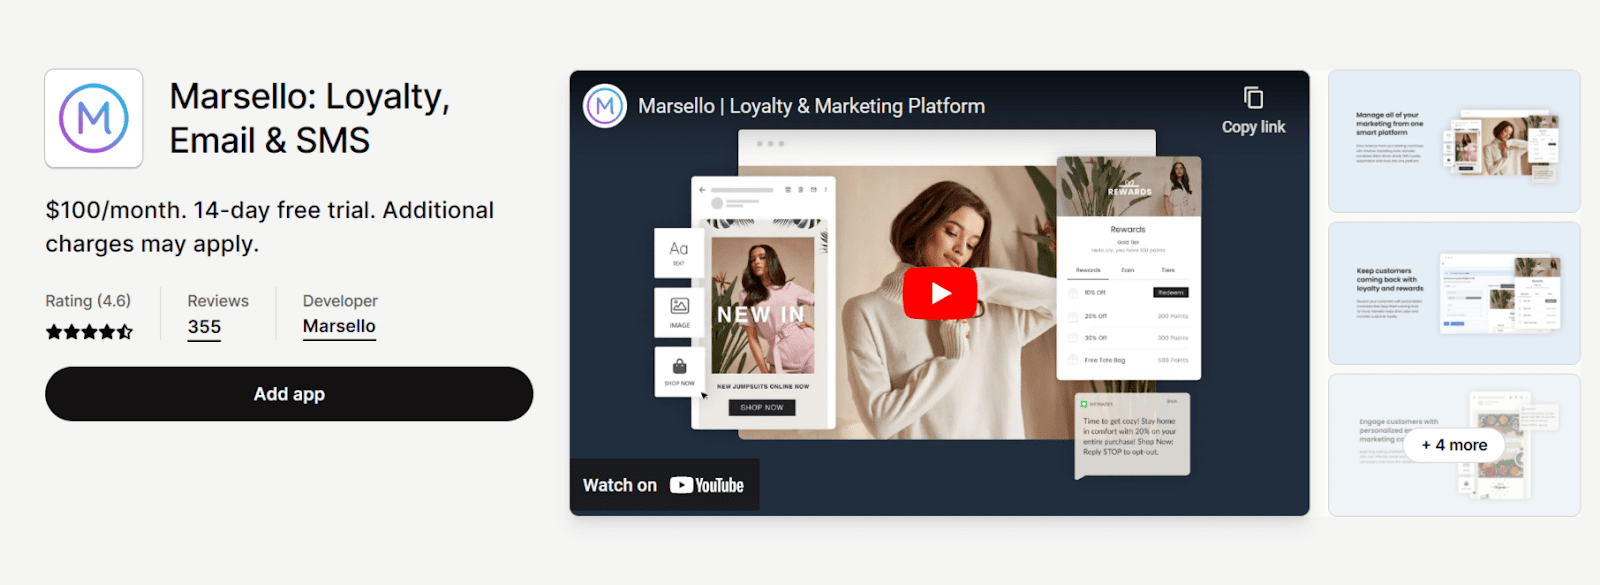 email marketing apps - marsello